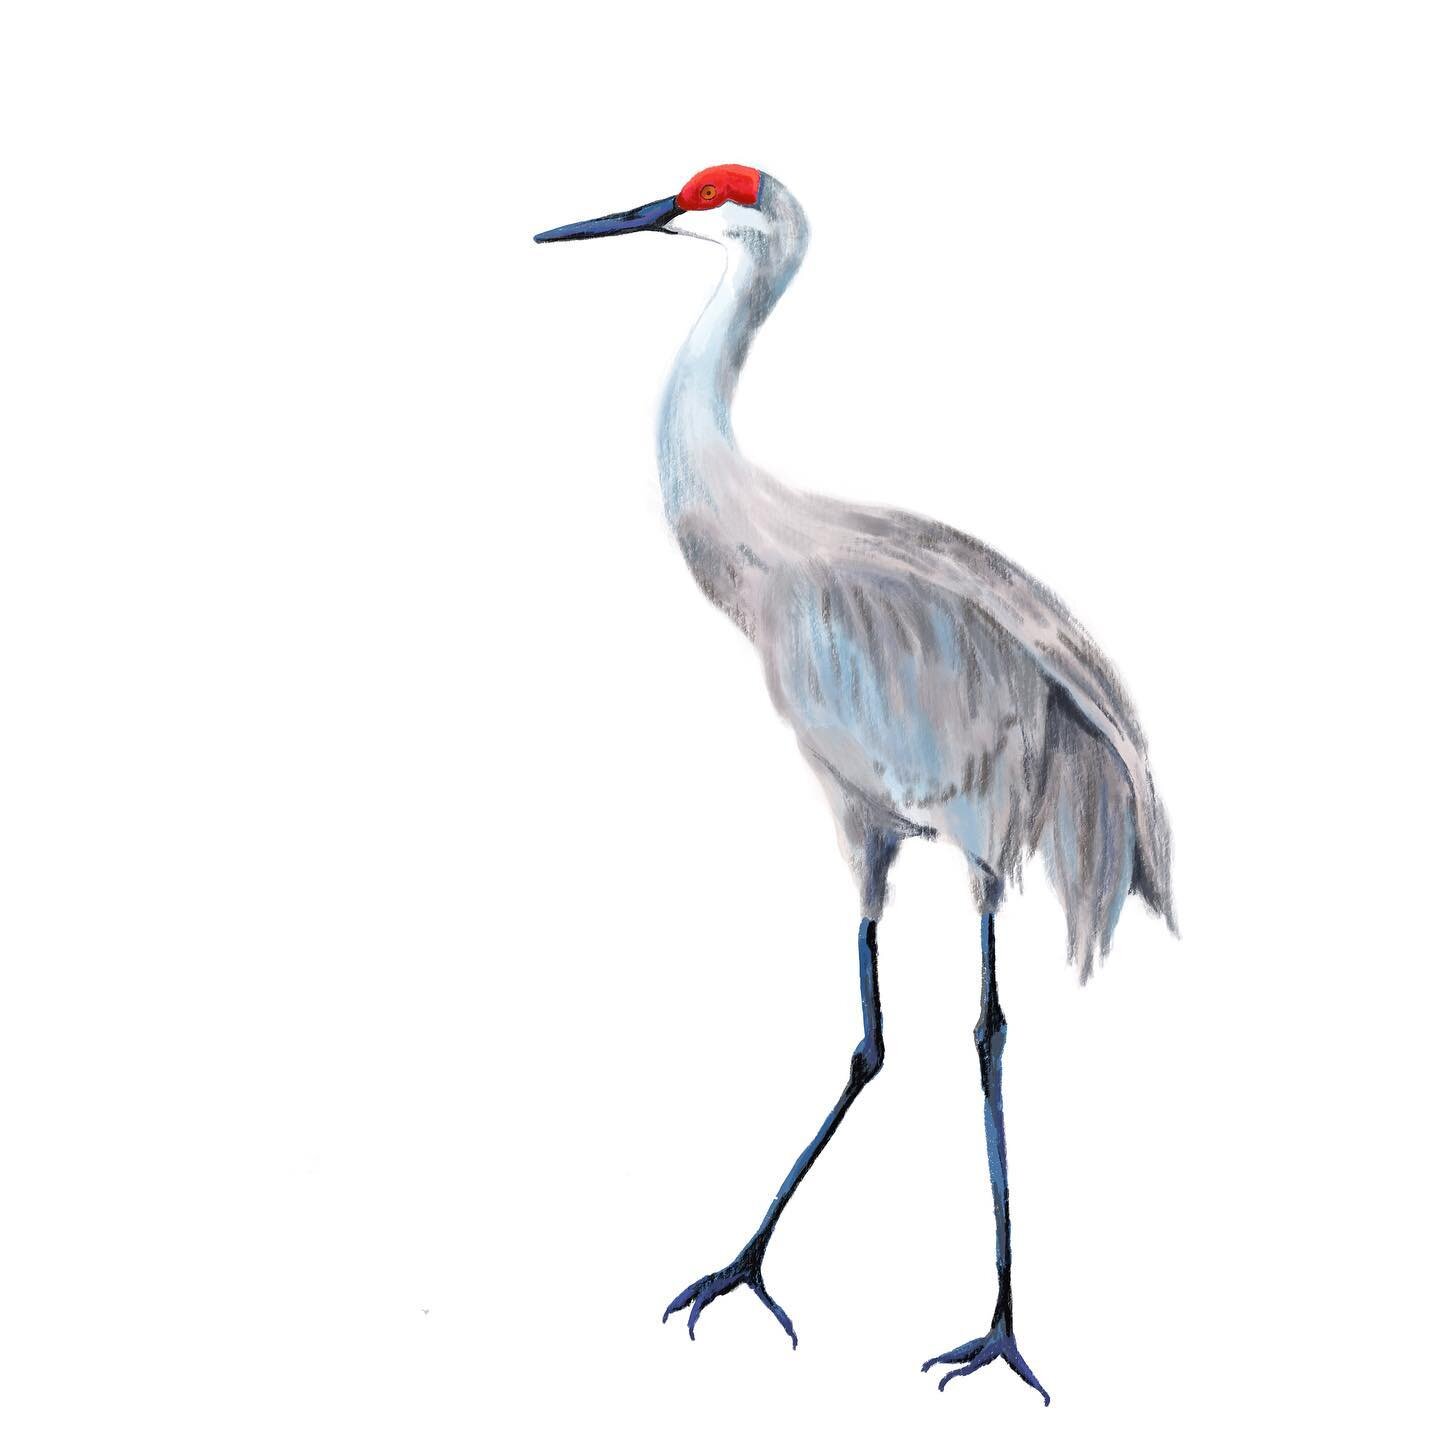 Mississippi Sandhill Crane. Critically Endangered. These cranes are a subspecies of sandhill crane that are only found on or near the Mississippi Sandhill Crane Wildlife Refuge. There are only about 100 remaining, threatened by habitat loss.
.
.
#one